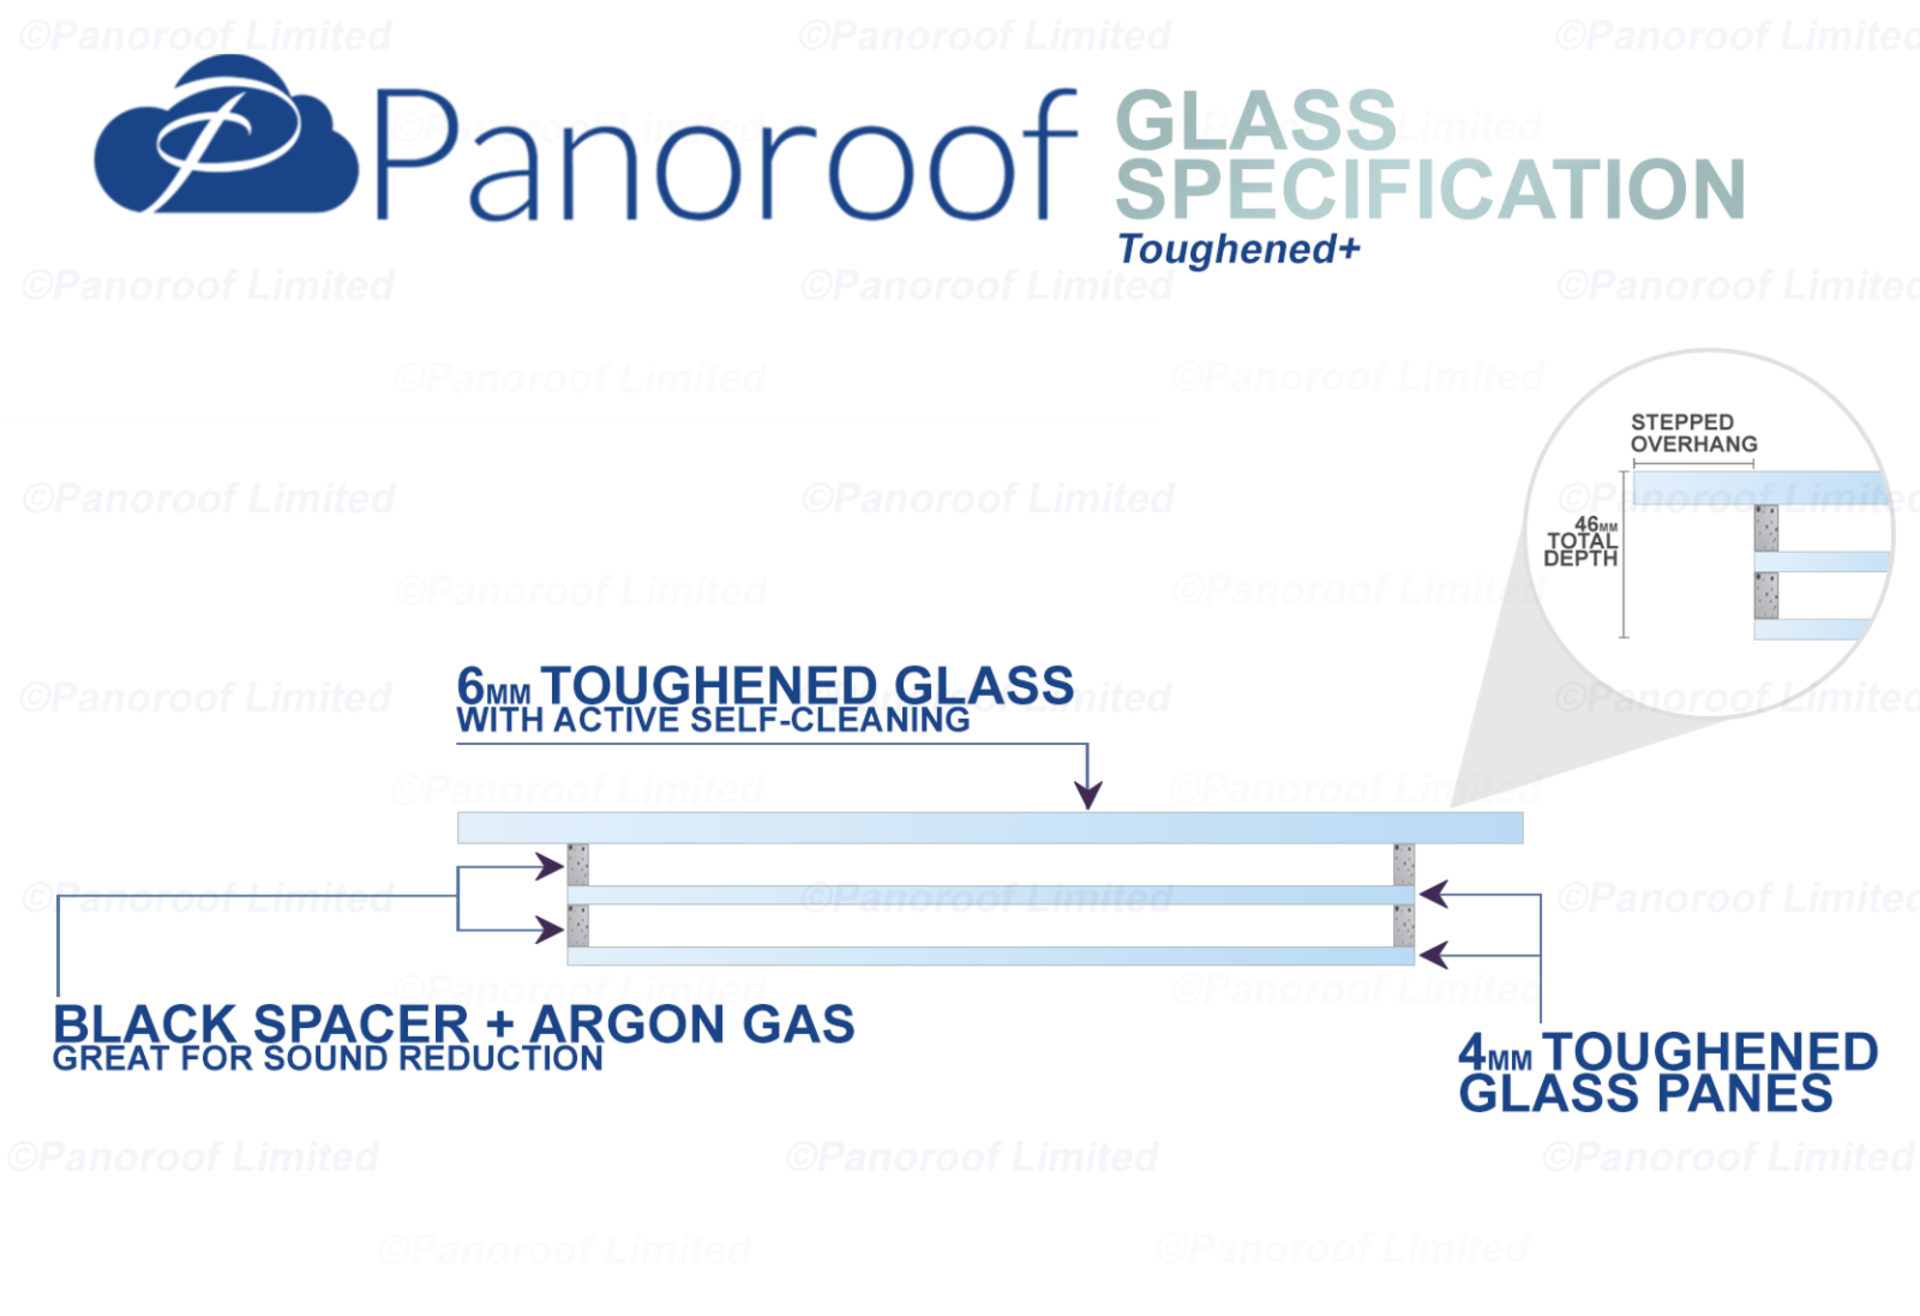 "Panoroof Triple Glazed Self Cleaning , 400x1500mm (inside Size Visable glass area) Seamless Glass - Image 4 of 6